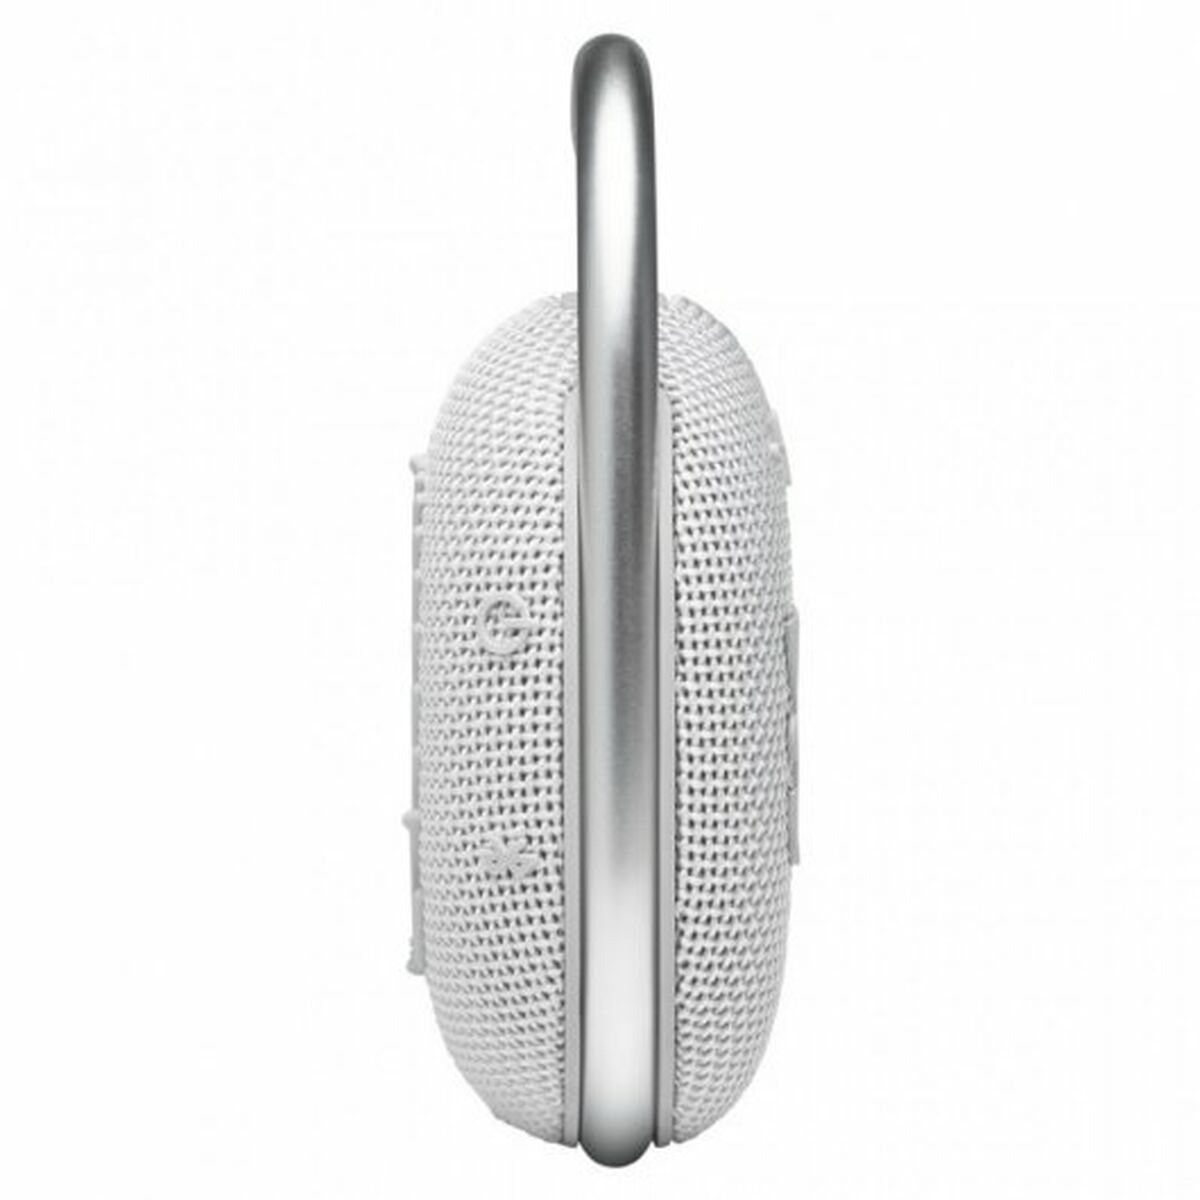 Portable Bluetooth Speakers JBL Clip 4  White 5 W, JBL, Electronics, Mobile communication and accessories, portable-bluetooth-speakers-jbl-clip-4-white-5-w, Brand_JBL, category-reference-2609, category-reference-2882, category-reference-2923, category-reference-t-19653, category-reference-t-21311, category-reference-t-25527, category-reference-t-4036, category-reference-t-4037, Condition_NEW, entertainment, music, Price_50 - 100, telephones & tablets, wifi y bluetooth, RiotNook